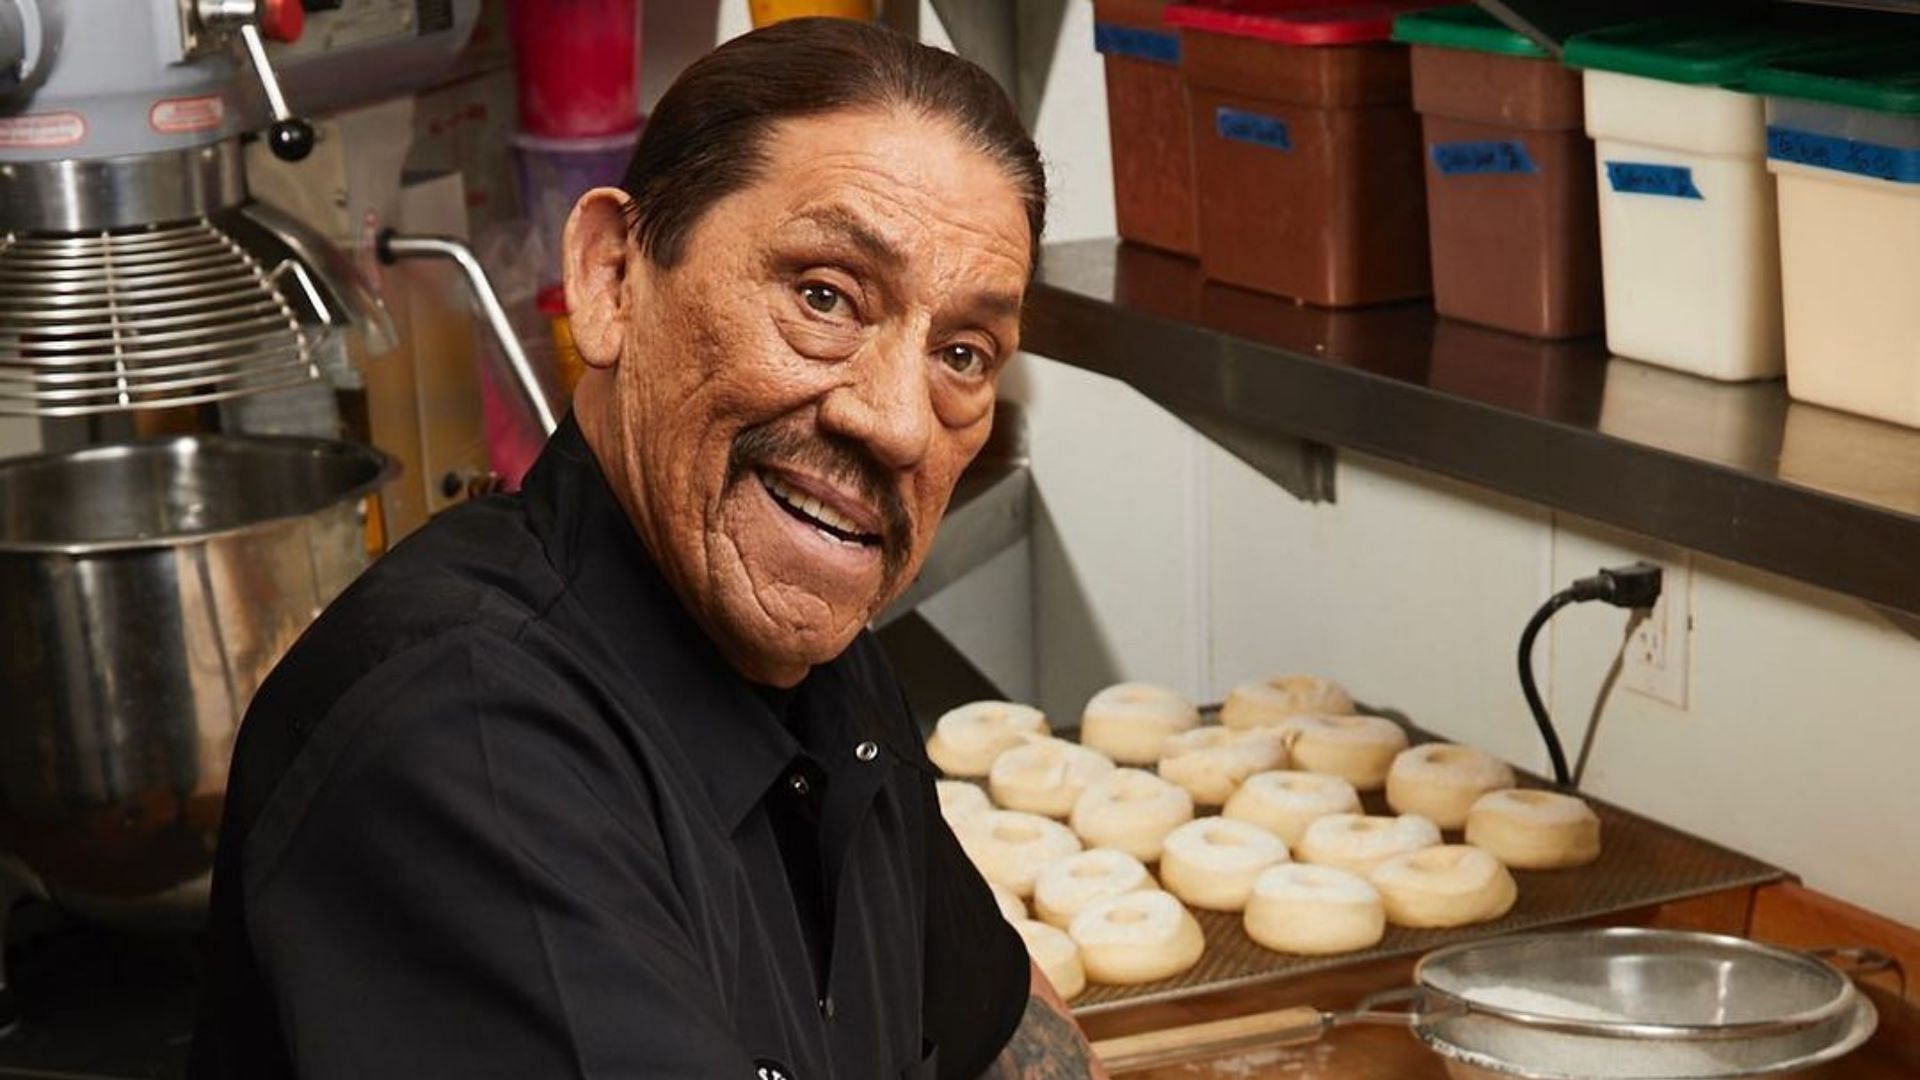 Danny Trejo is set to make an appearance in the upcoming episode of Hell